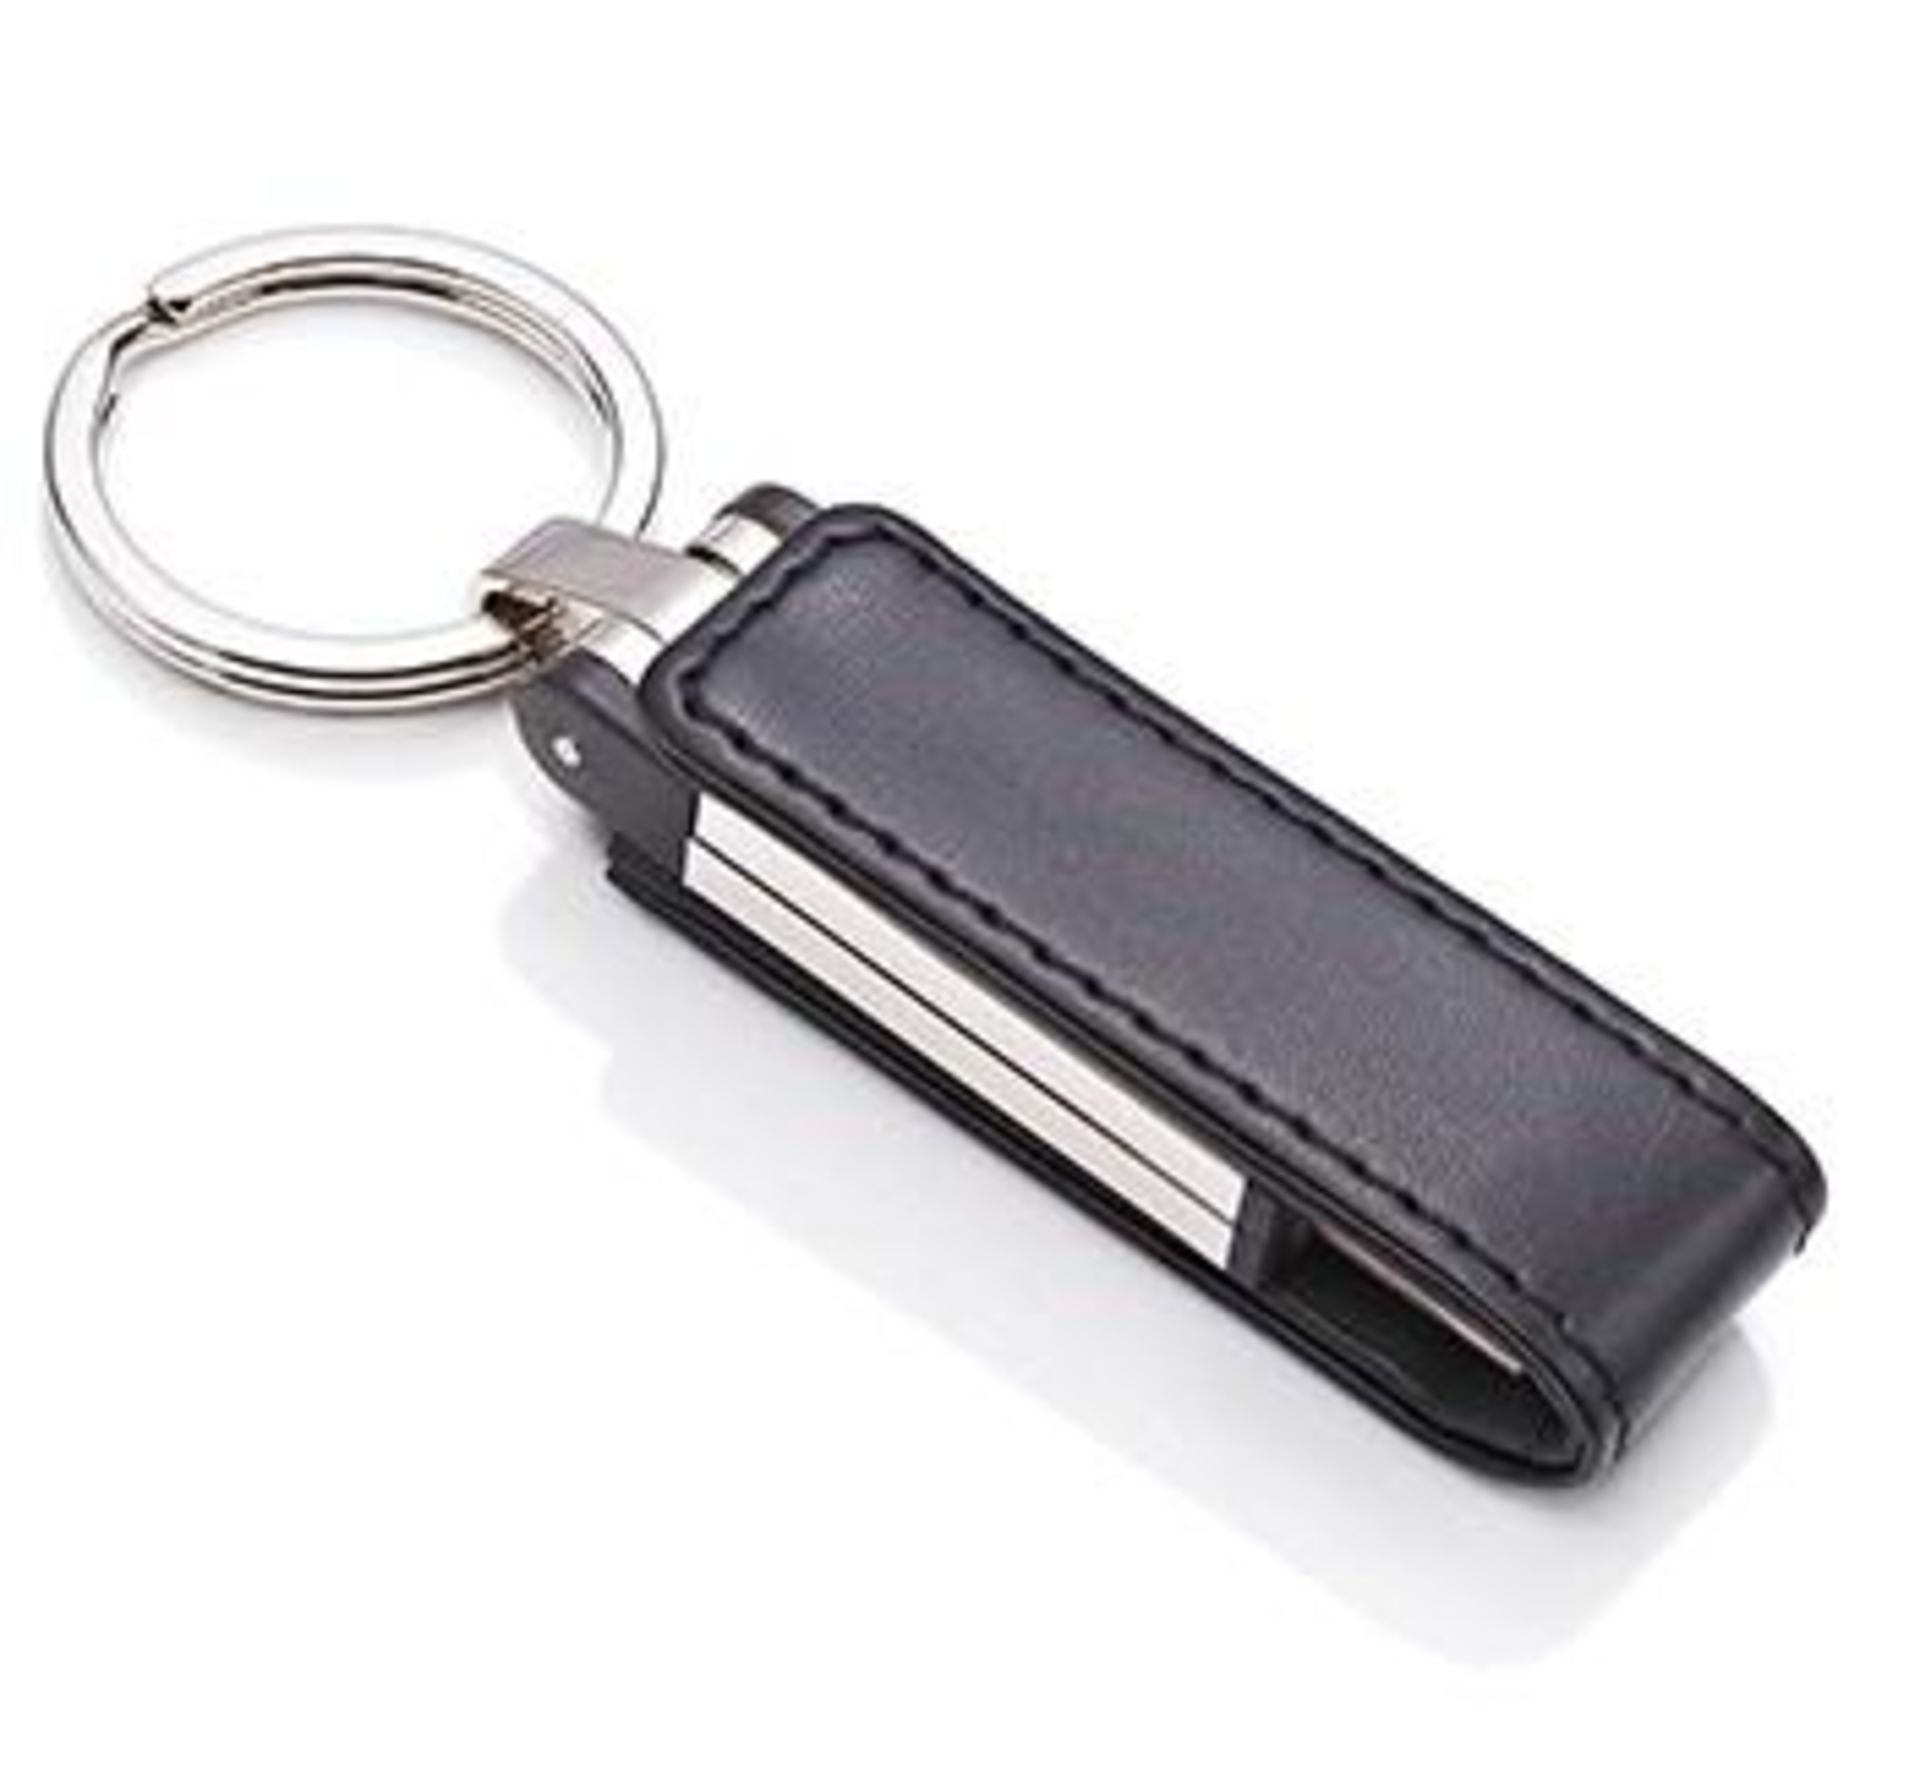 1 x ICE London Silver Plated 2GB USB Flashdrive Keyring - Features A Genuine Leather Wrap With - Image 2 of 6